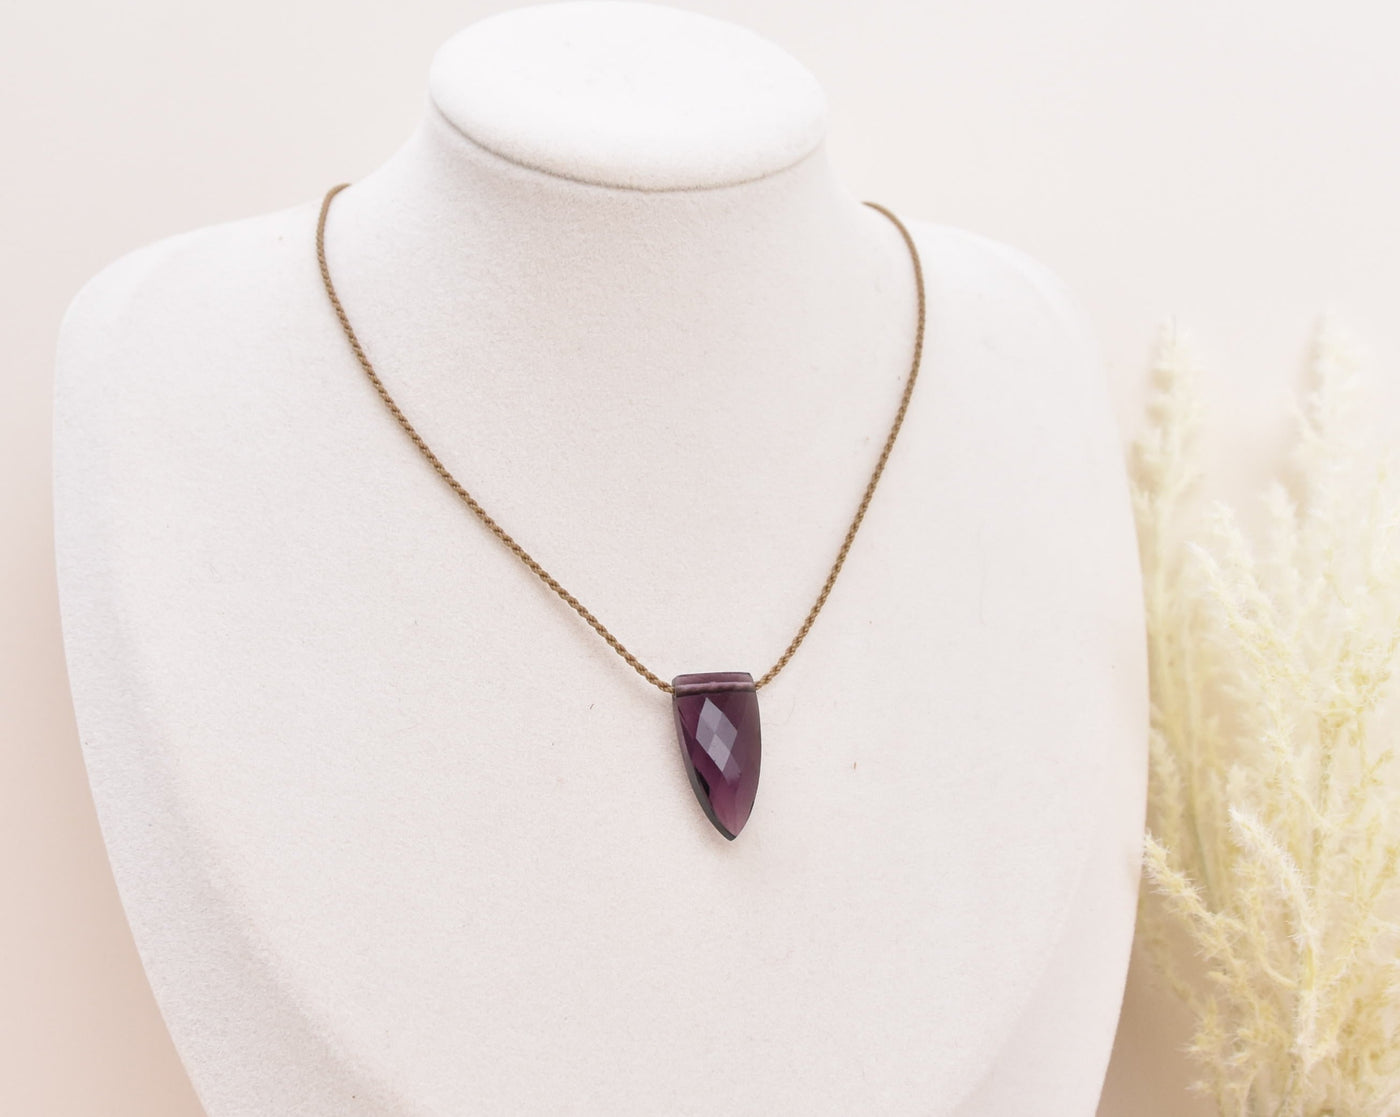 Amethyst Pyramid Necklace - Limited!